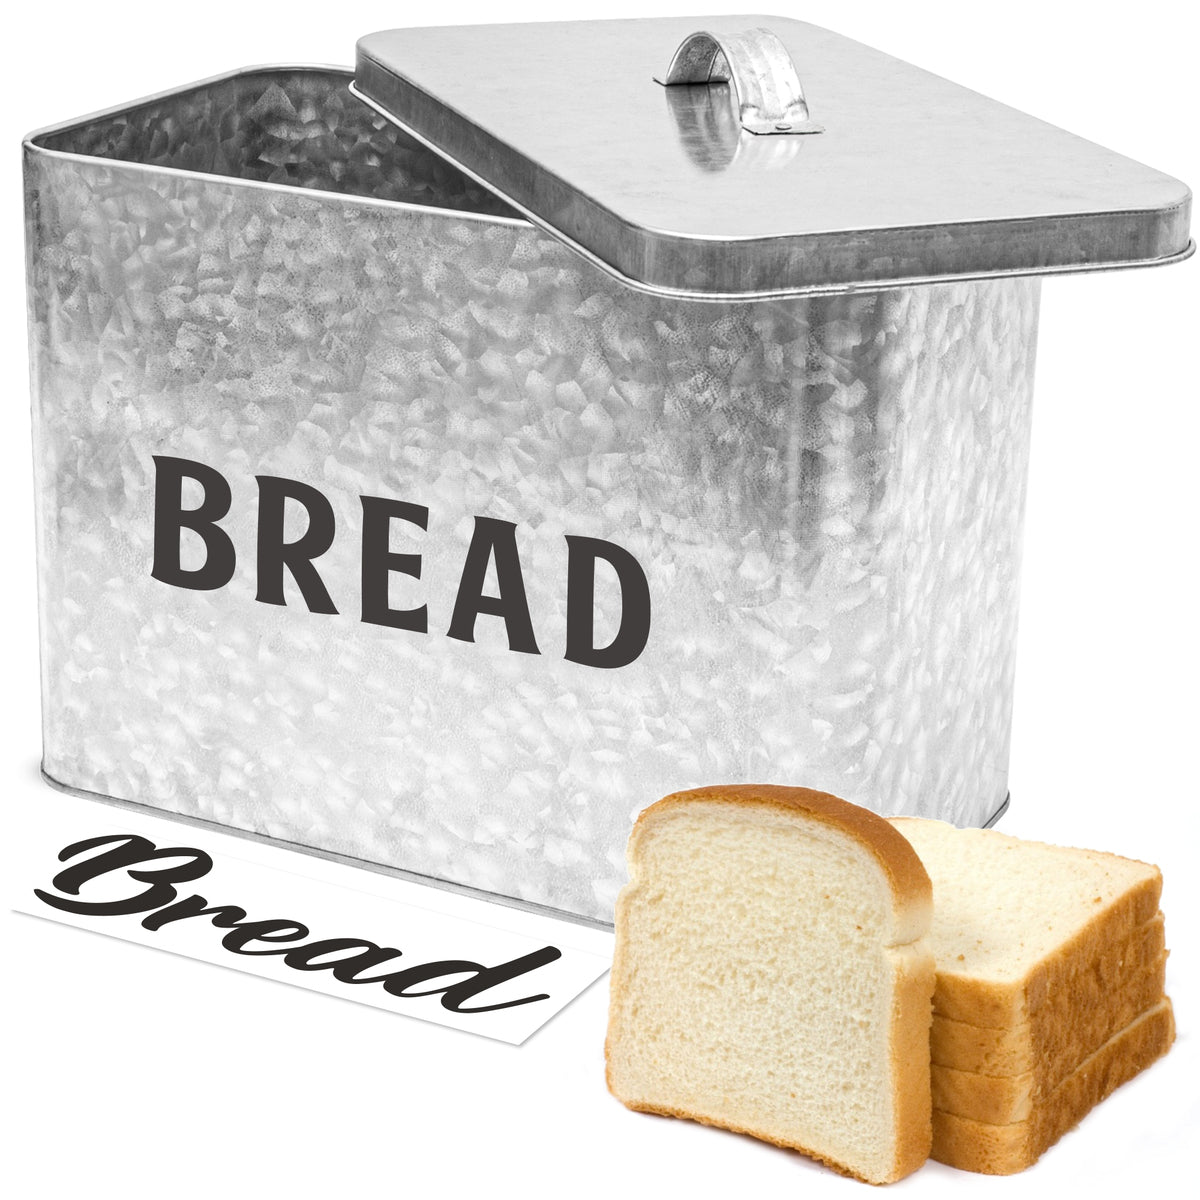 Galvanized Bread Box by Saratoga Home featuring extra sticker label and bread loaf in front